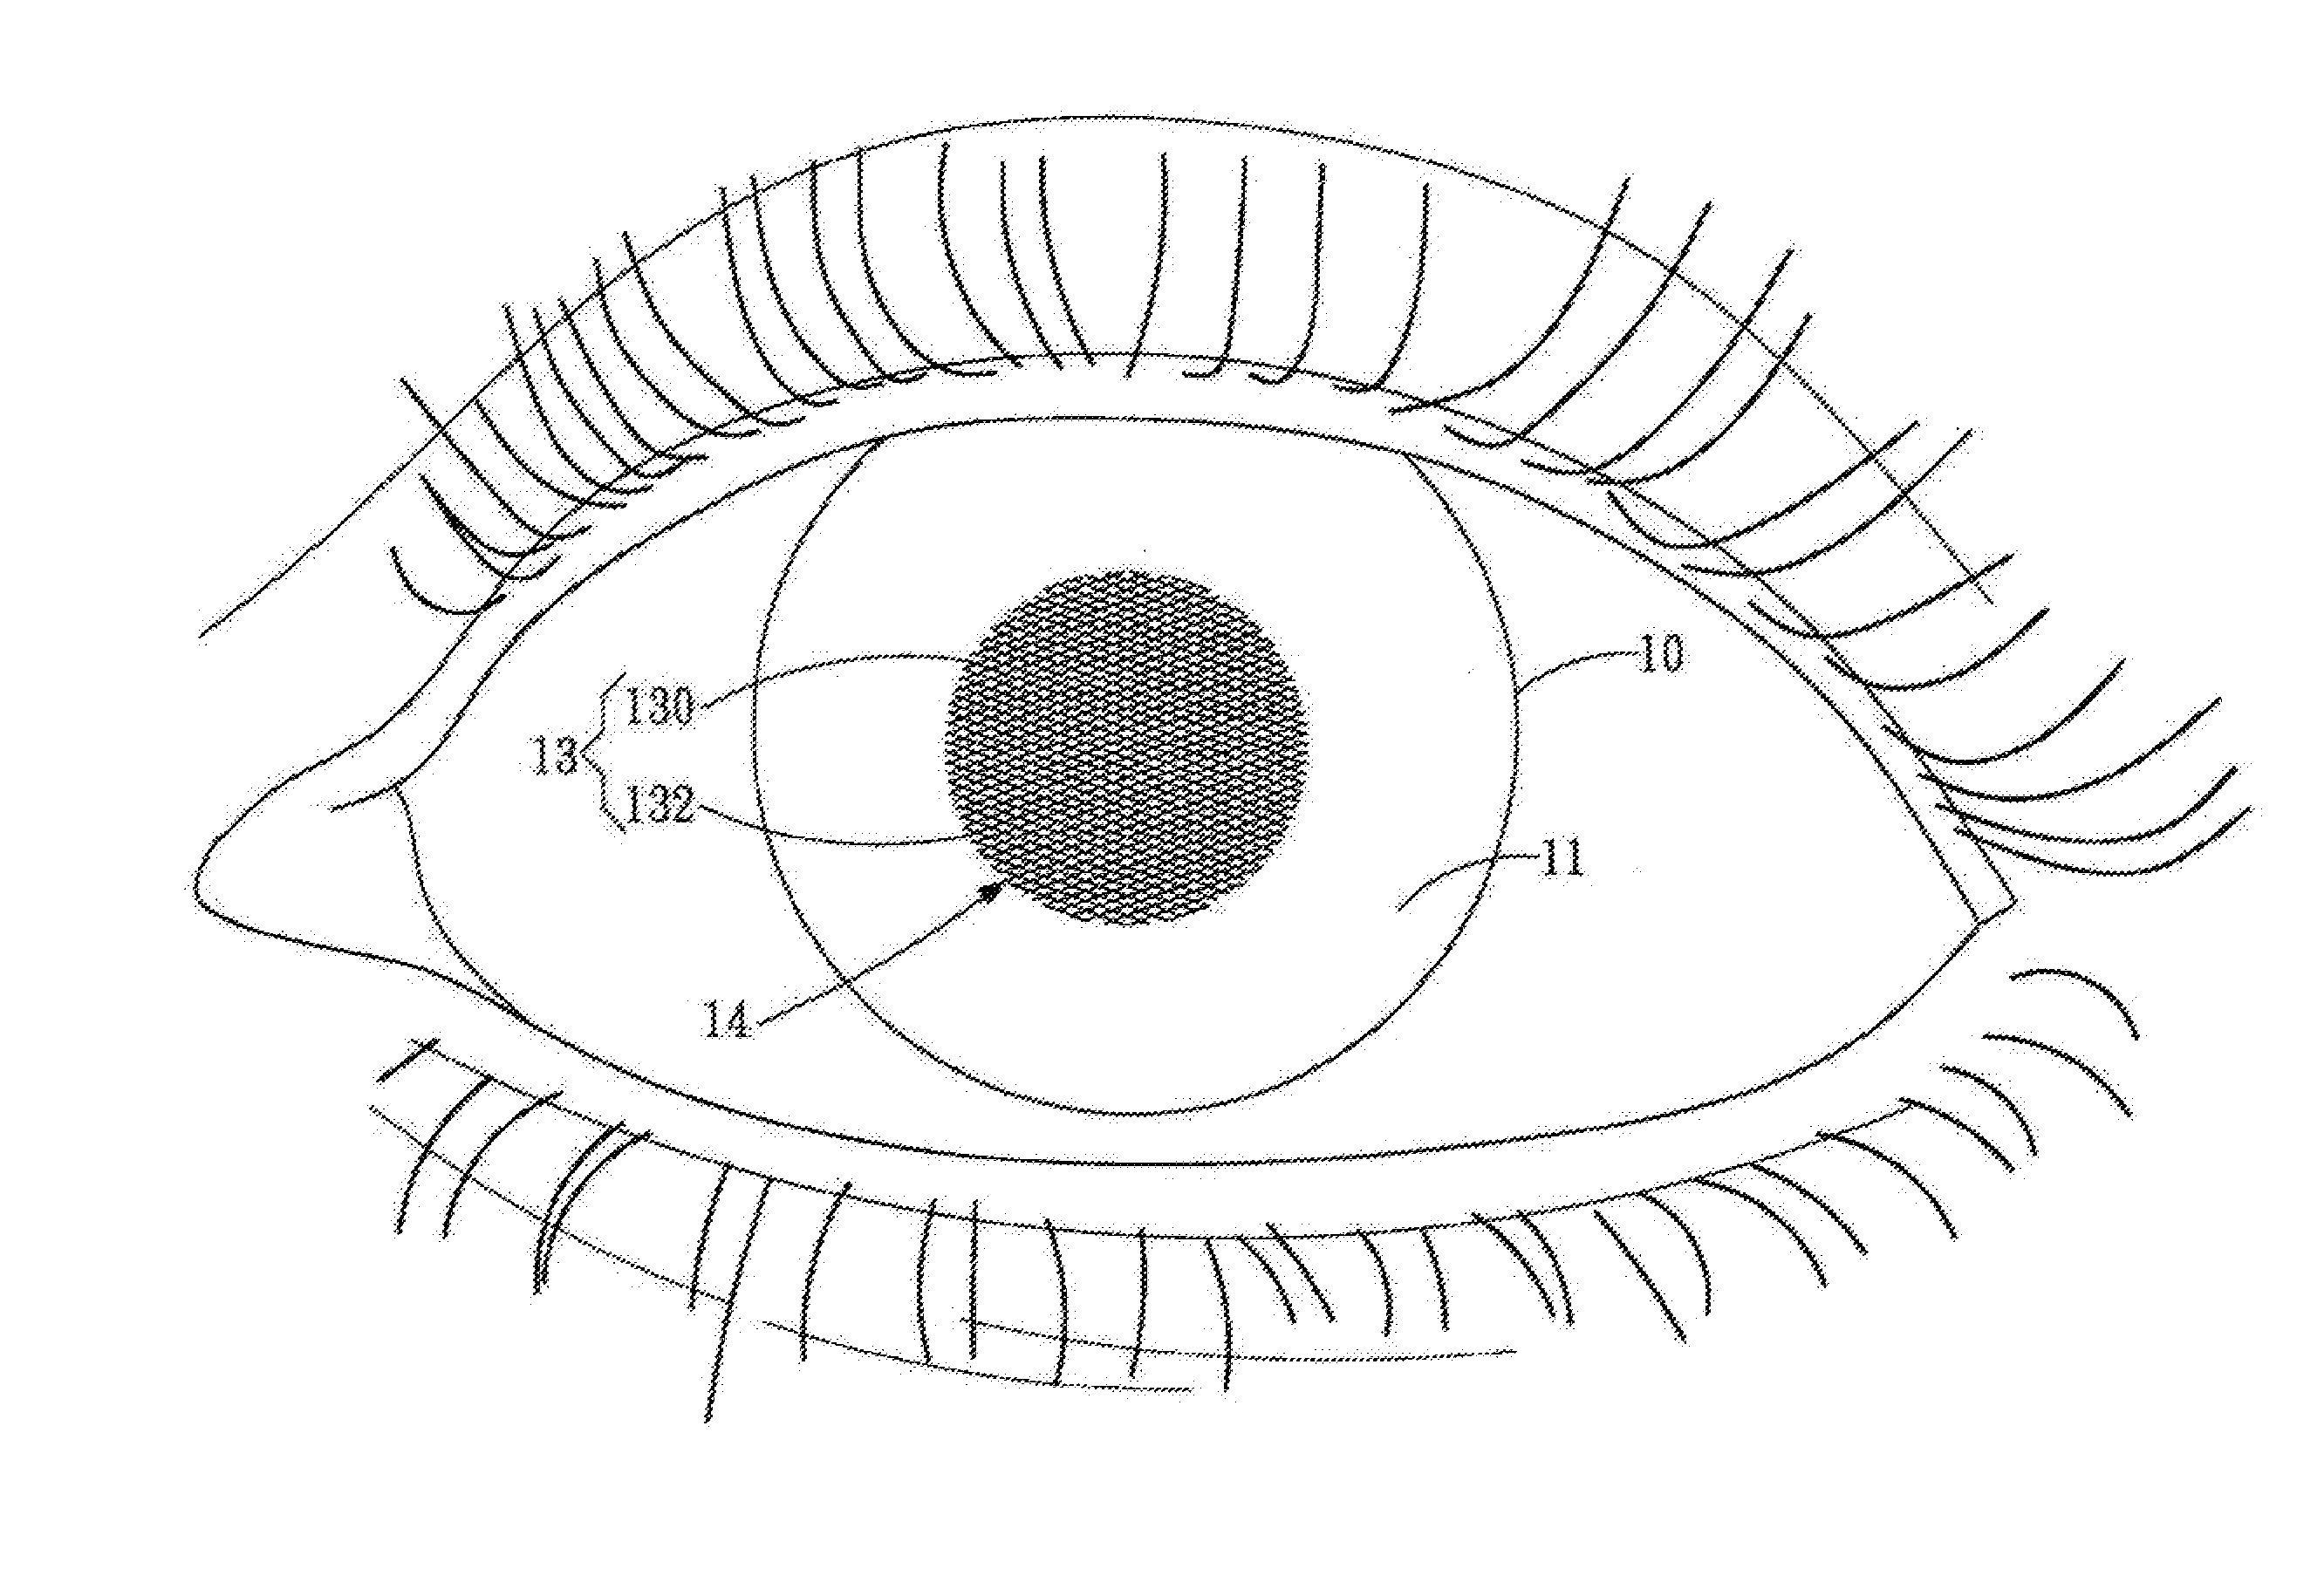 System and method for monitoring change of intraocular pressure and contact lens for sensing change of intraocular pressure